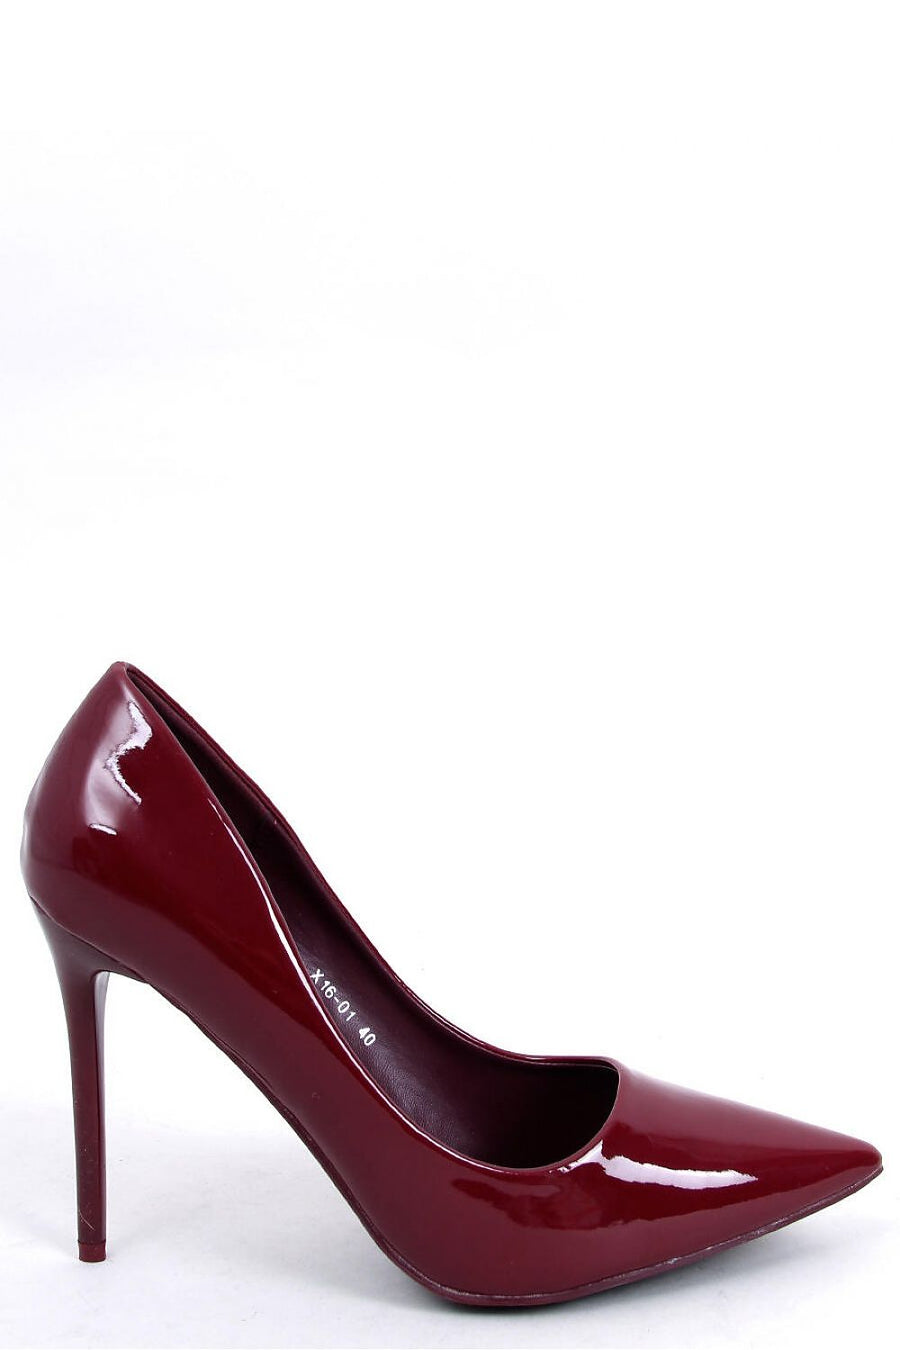 Red pumps with a stiletto heel.